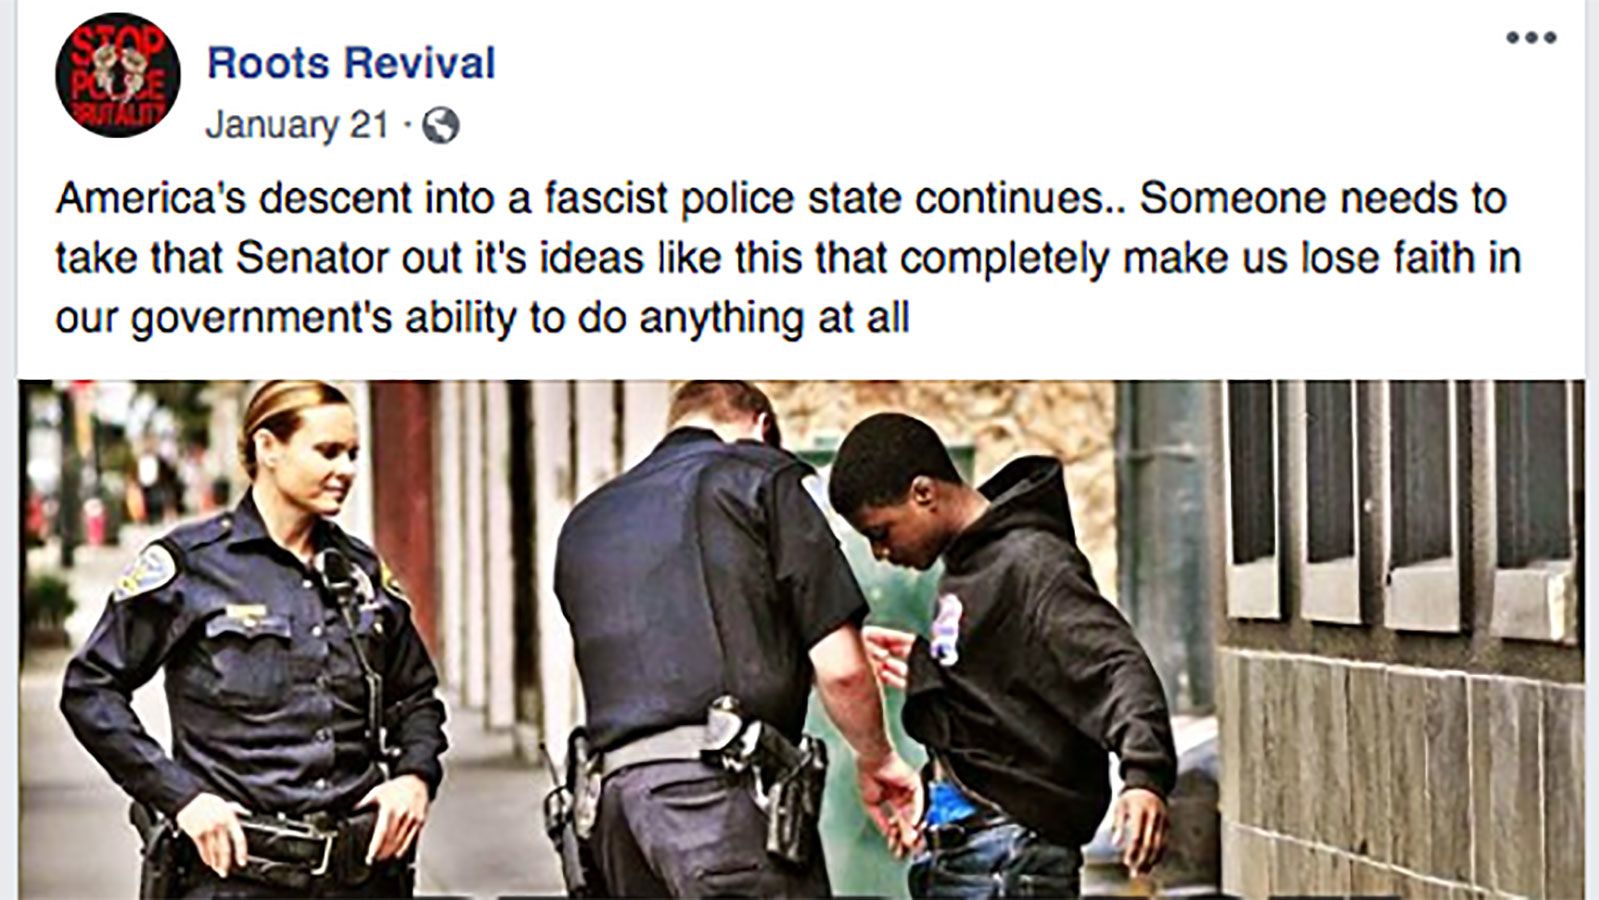 An image from a now-deleted Facebook page of one of the trolls touted alleged police targeting of African Americans.